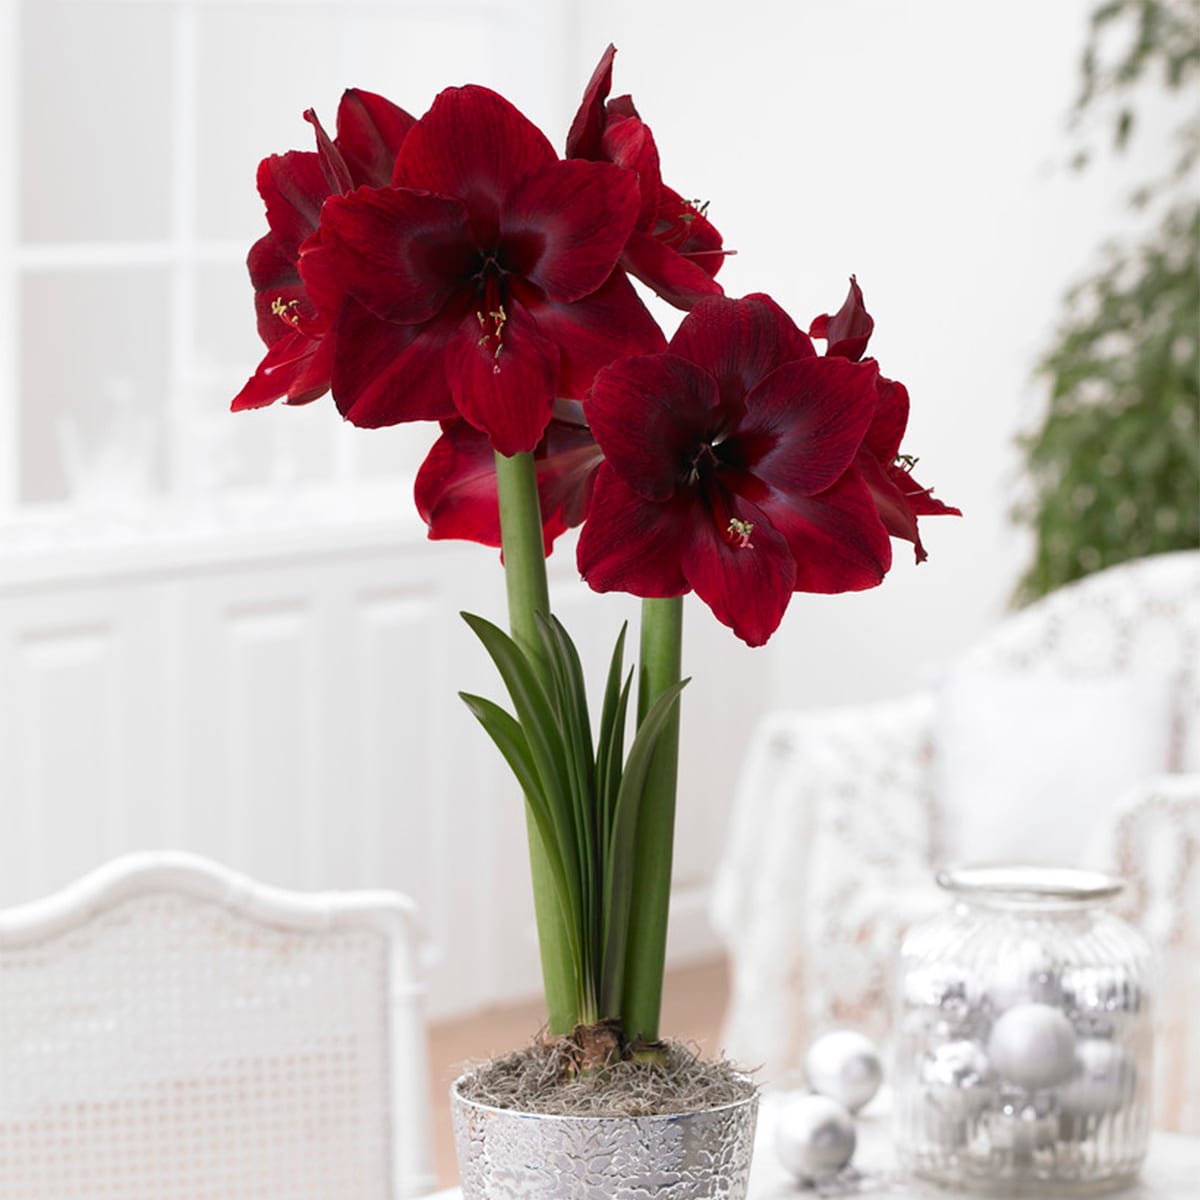 Van Zyverden Red Amaryllis Red Pearl Bulbs 1-Pack in the Plant Bulbs ...